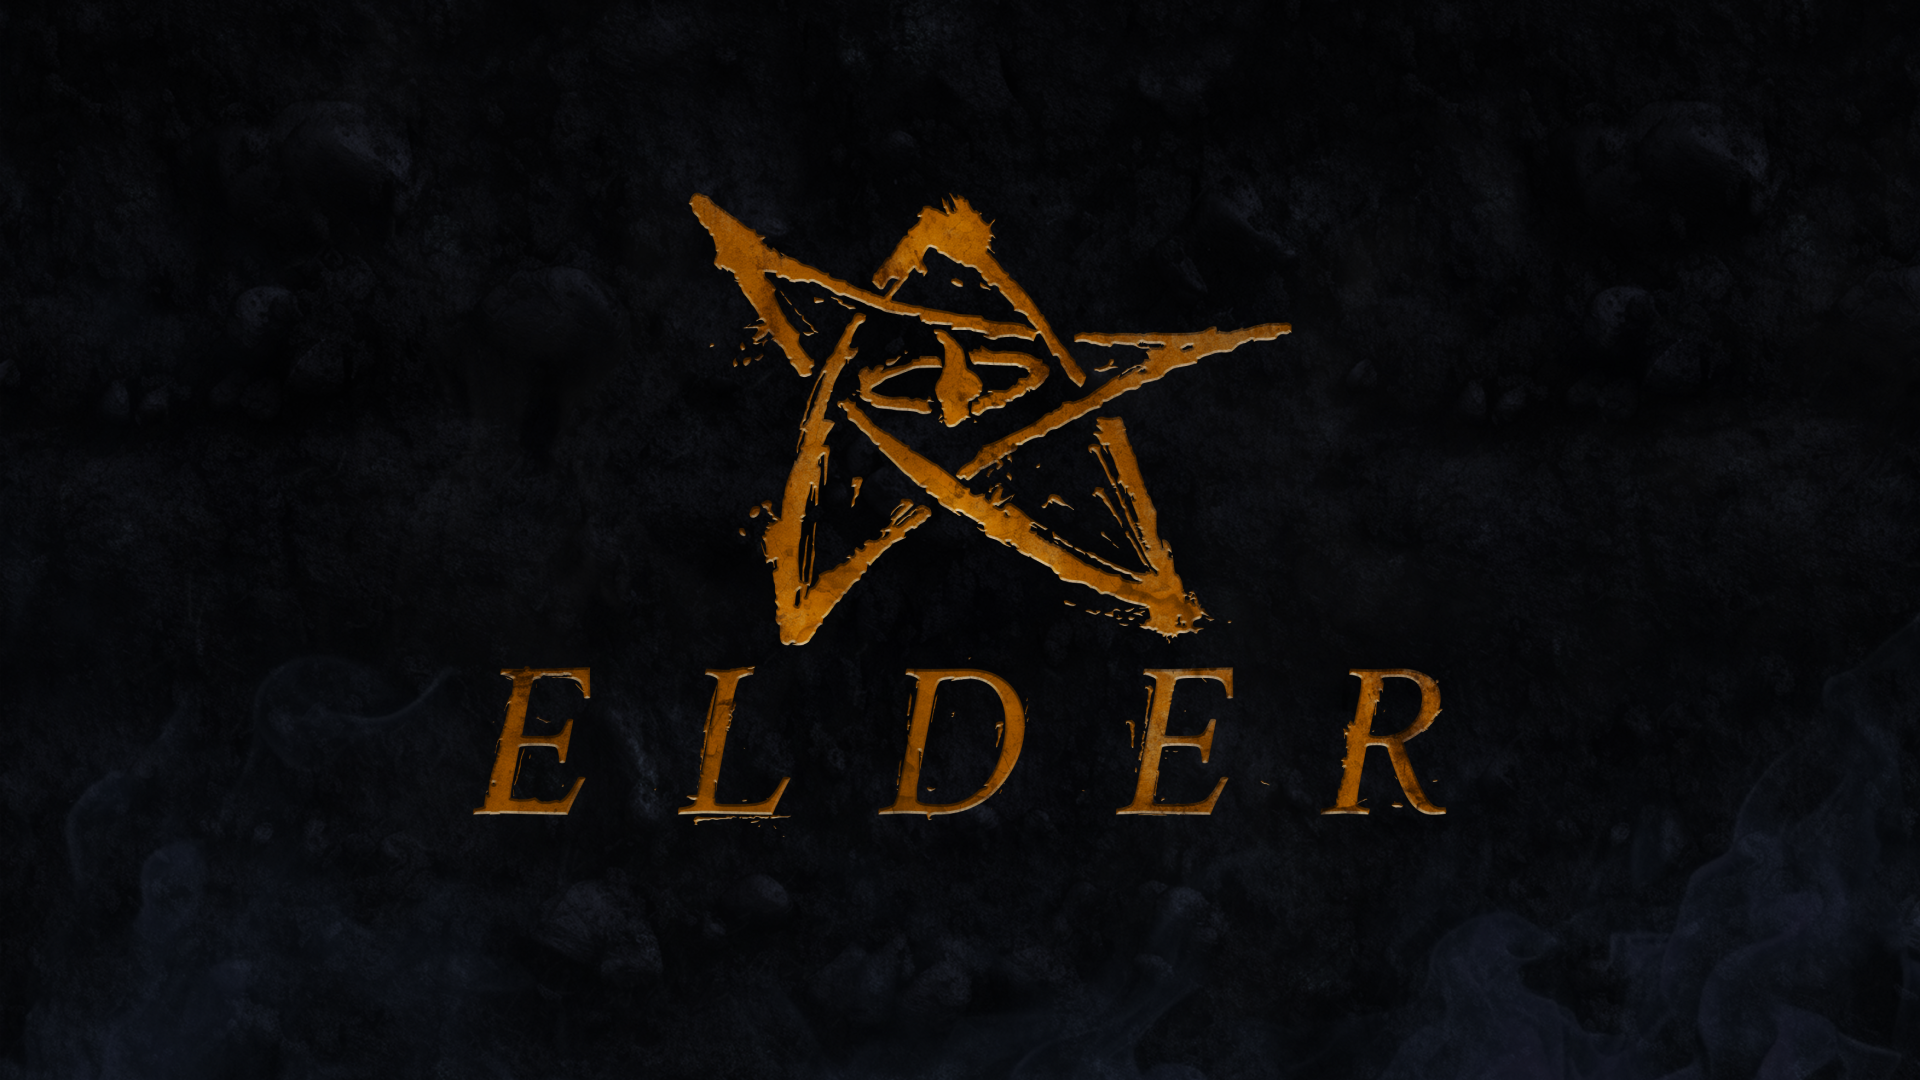 Logo for Elder that features a star symbol